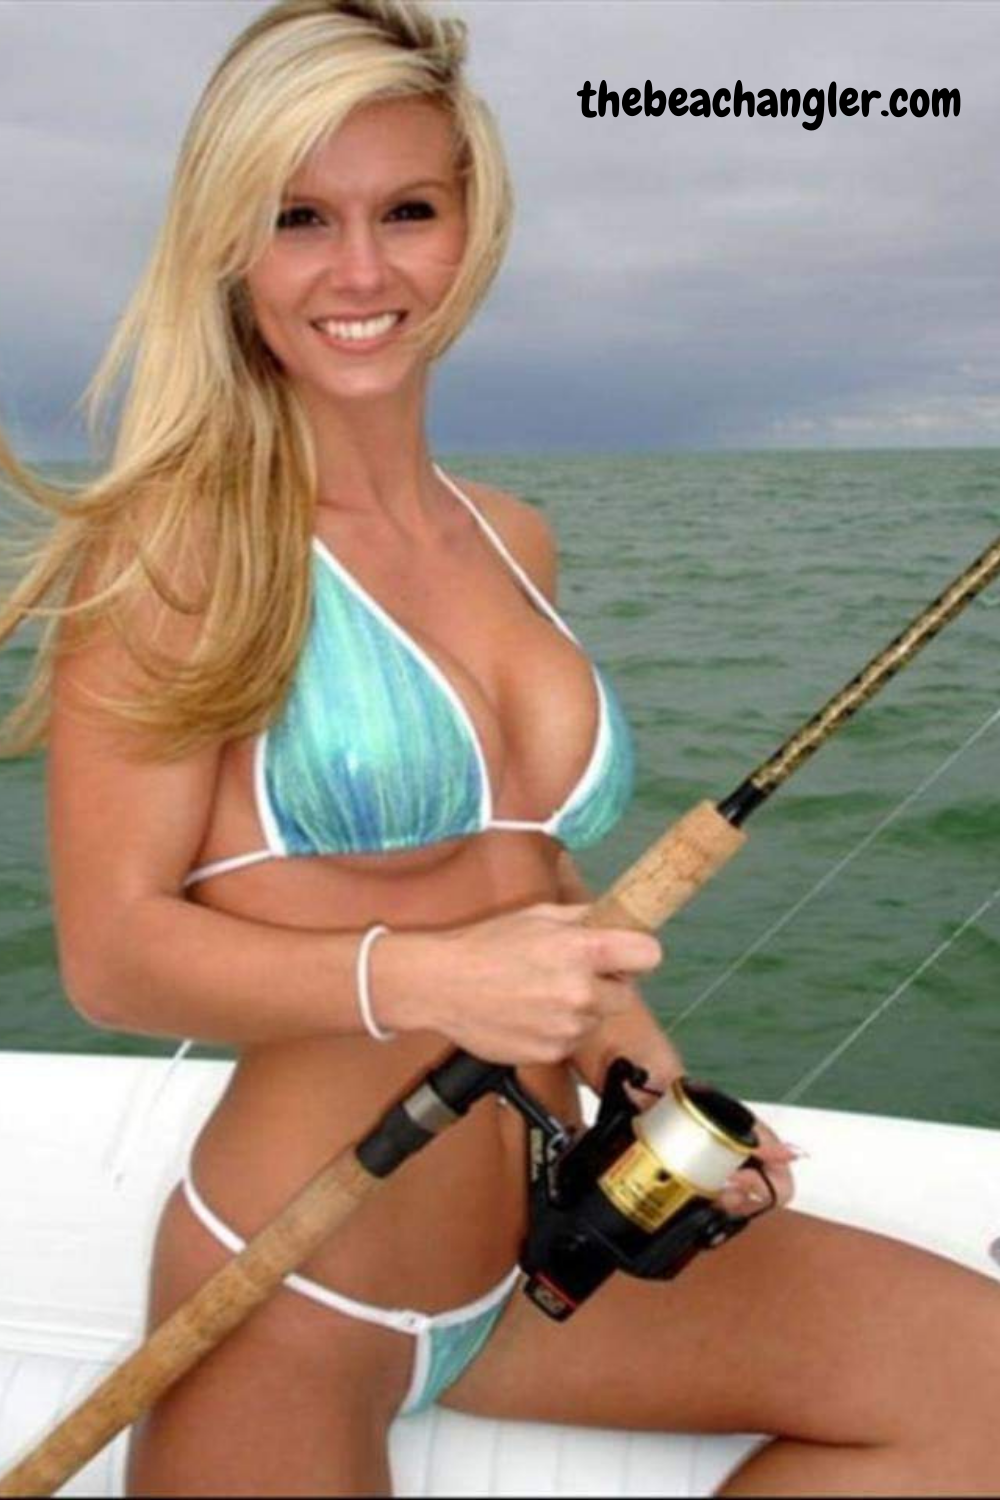 Young Lady fishing with her Daiwa BG spinning reel - 7 Best Daiwa Spinning Reels